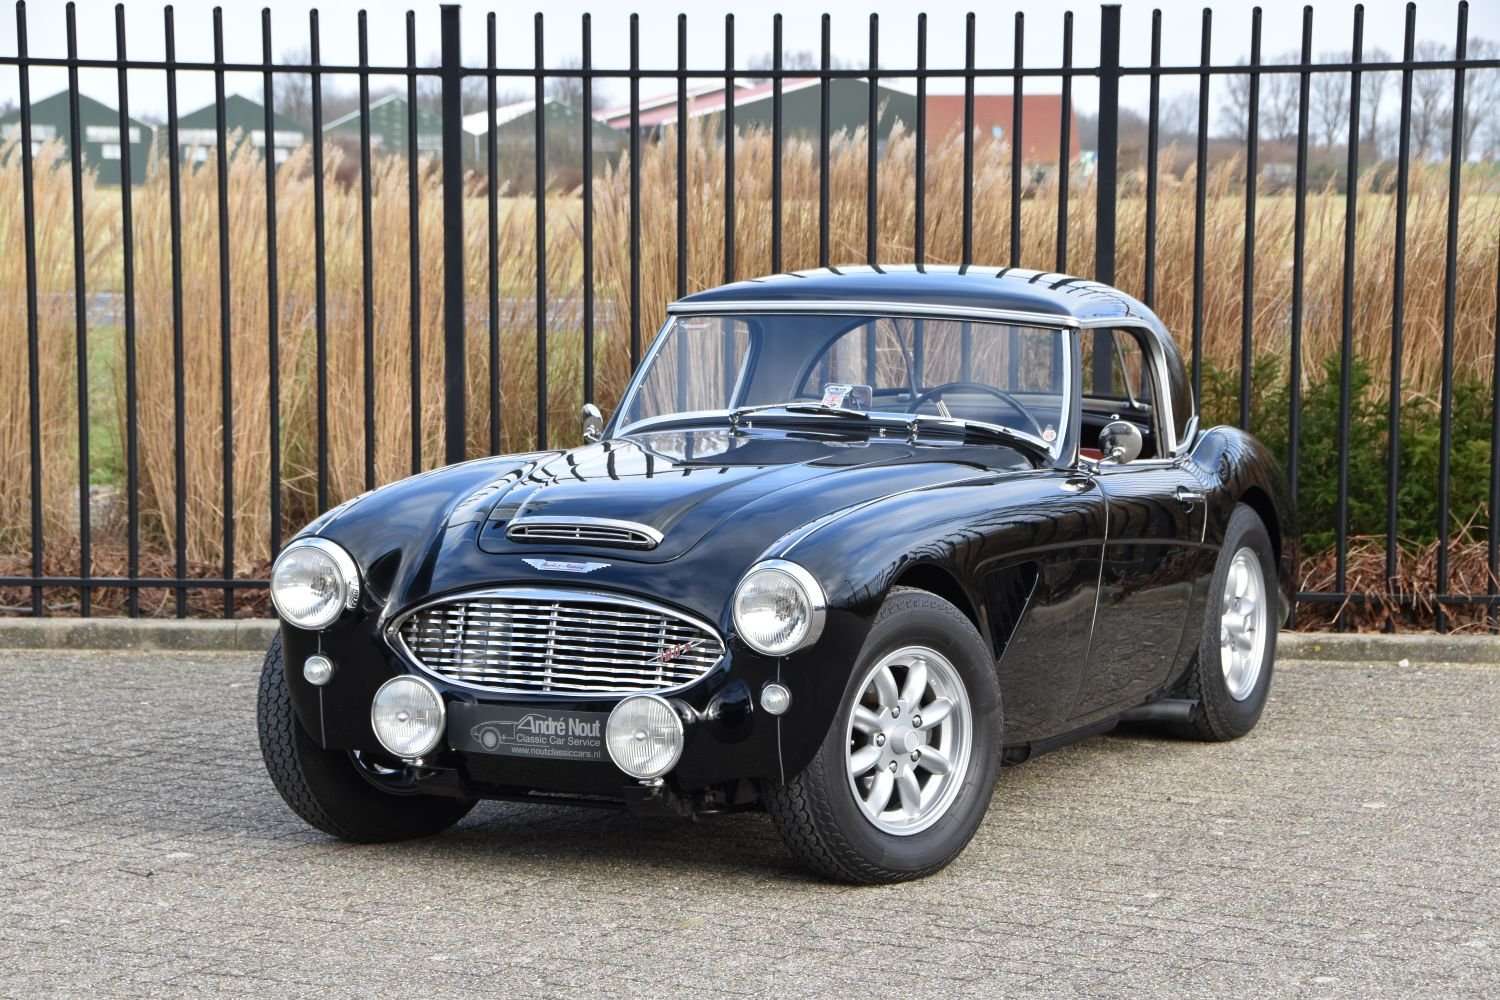 Austin-Healey 100 Convertible in Black antique / classic in DIRKSLAND for € 79,500.-